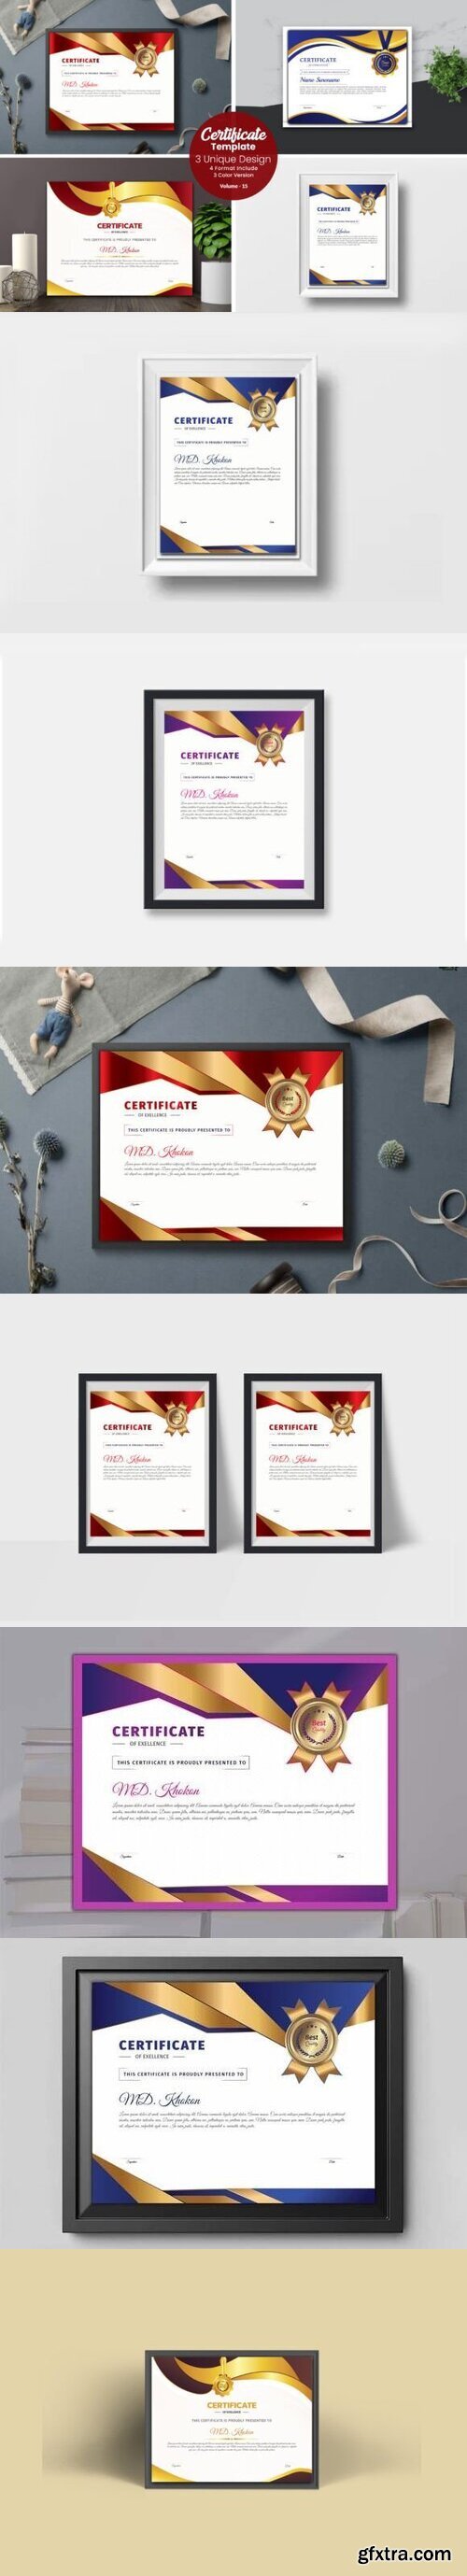 Abstract Certificate Template Design